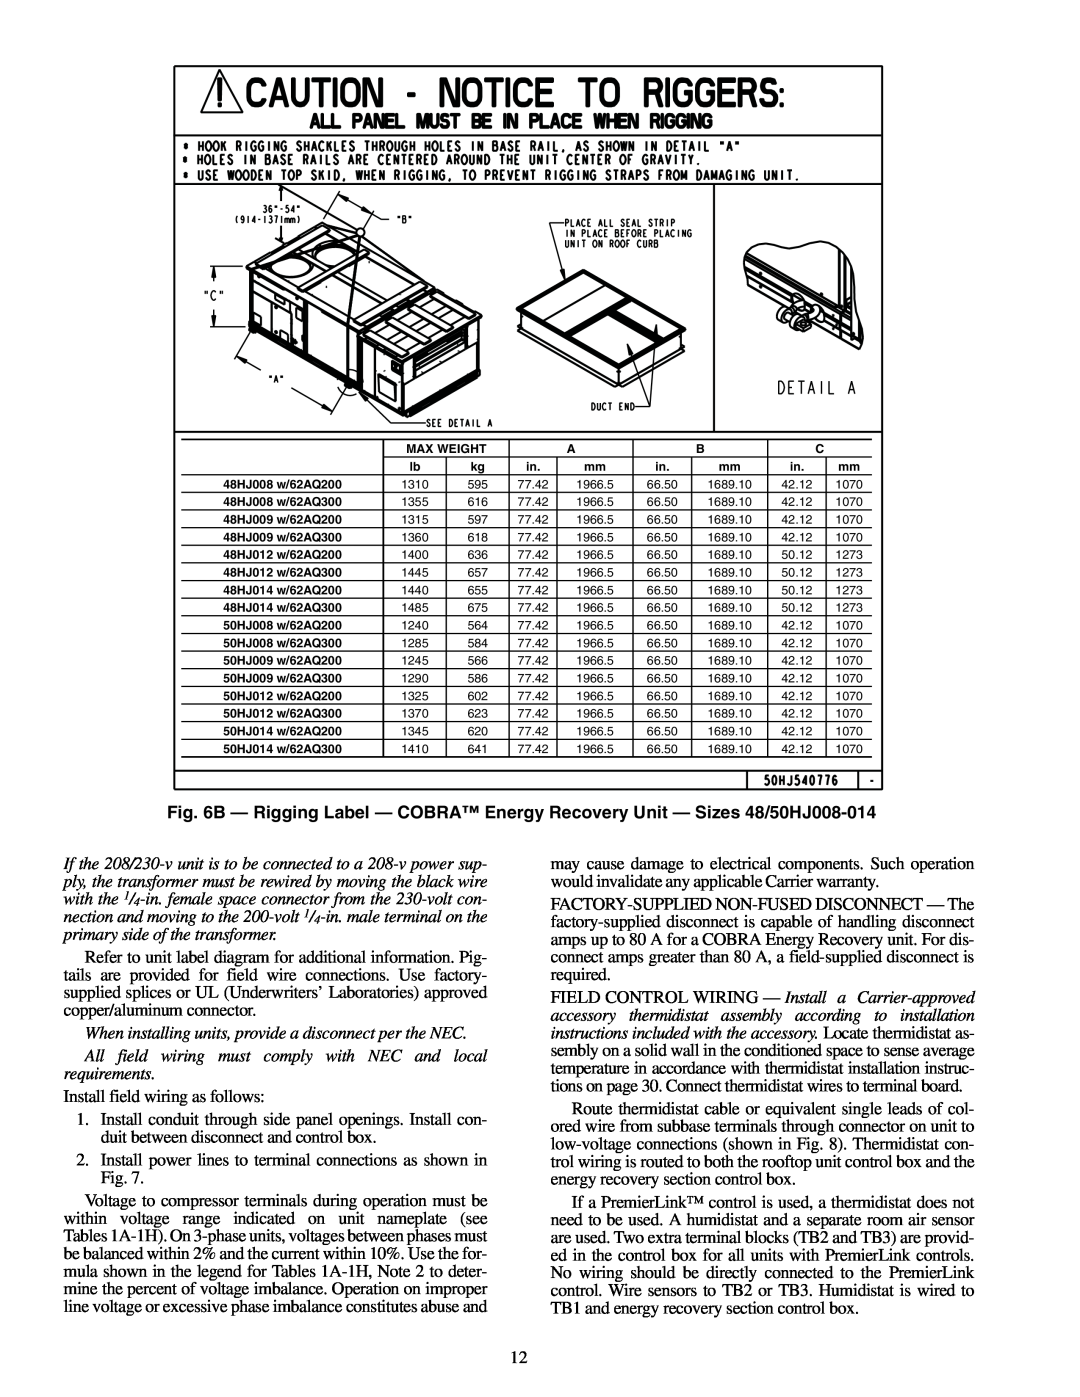 Carrier 48/50HJ004-014 specifications Install field wiring as follows 